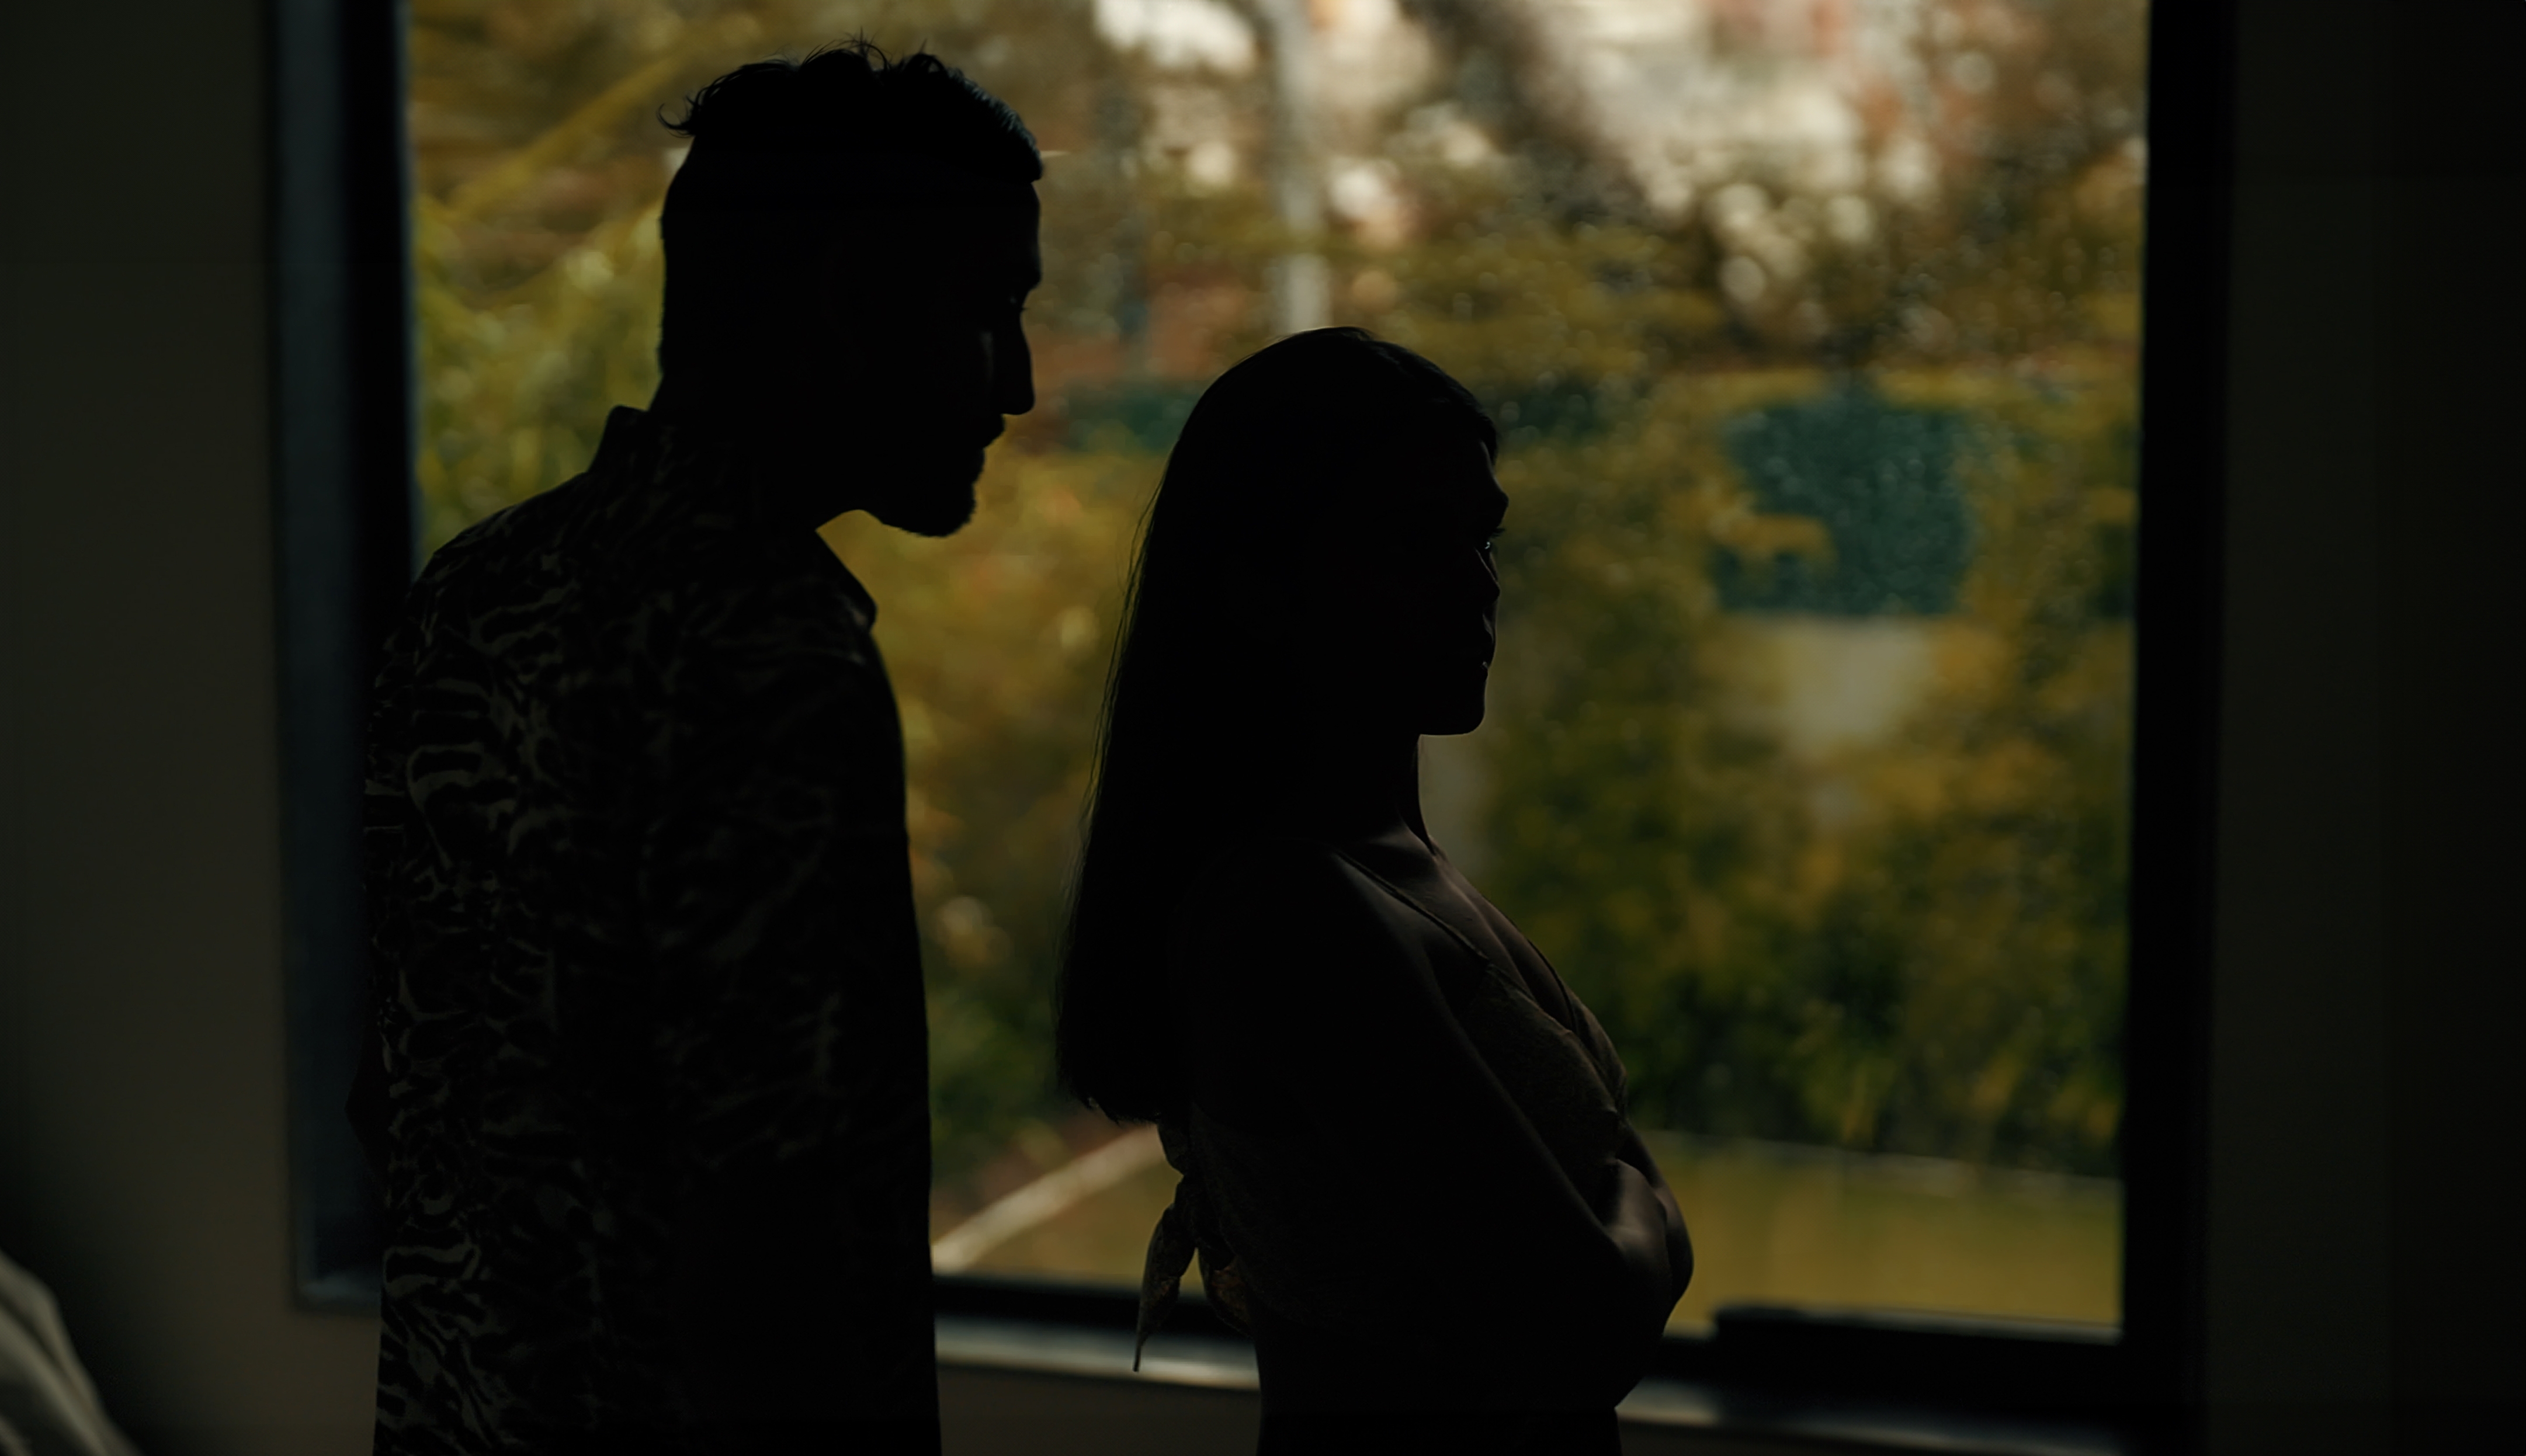 A silhouette of a couple standing near a window after an argument | Source: Shutterstock